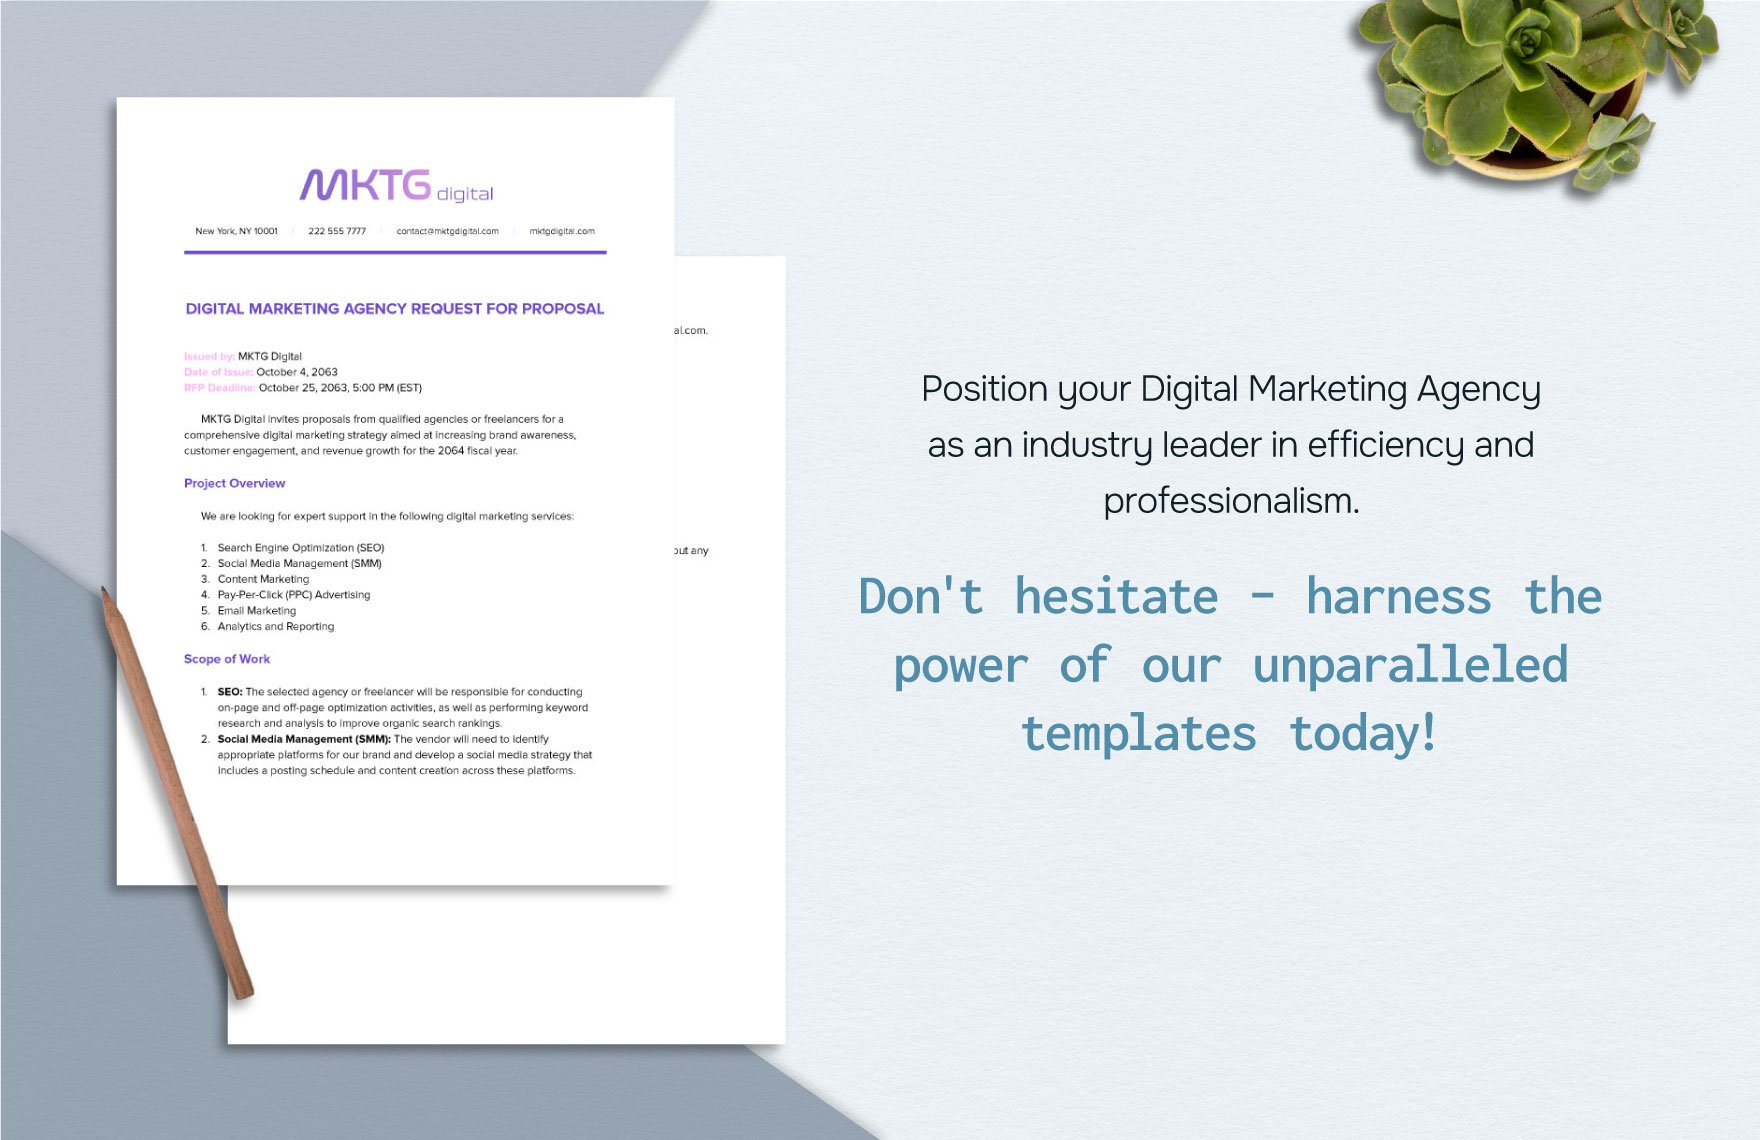 Digital Marketing Agency Request for Proposal (RFP) Template